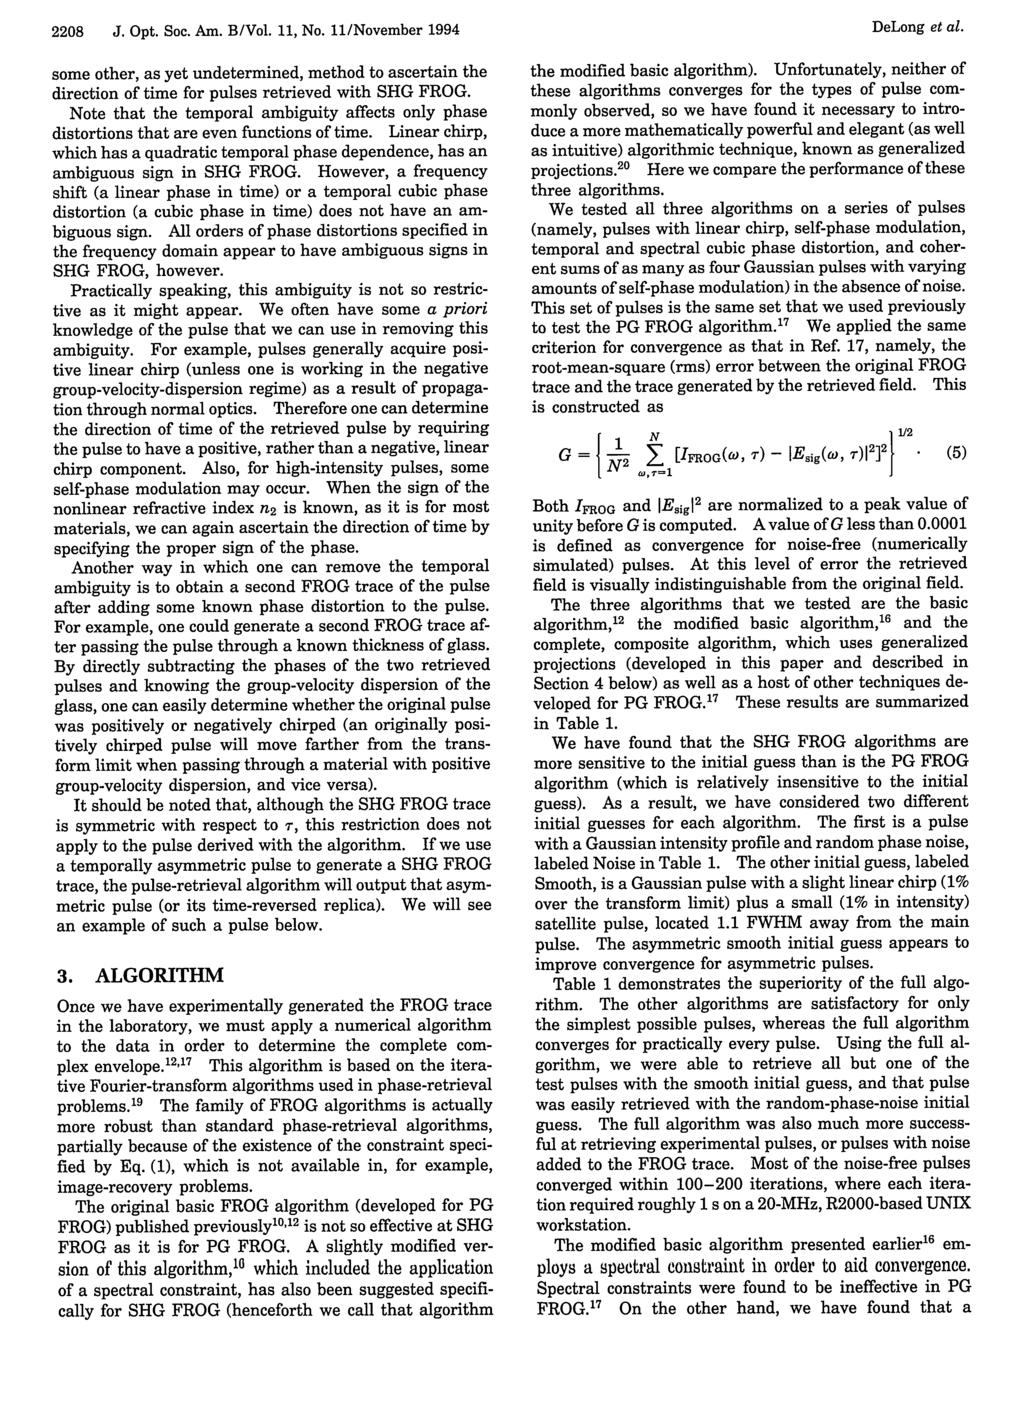 2208 J. Opt. Soc. Am. B/Vol. 11, No. 11/November 1994 some other, as yet undetermined, method to ascertain the direction of time for pulses retrieved with SHG FROG.